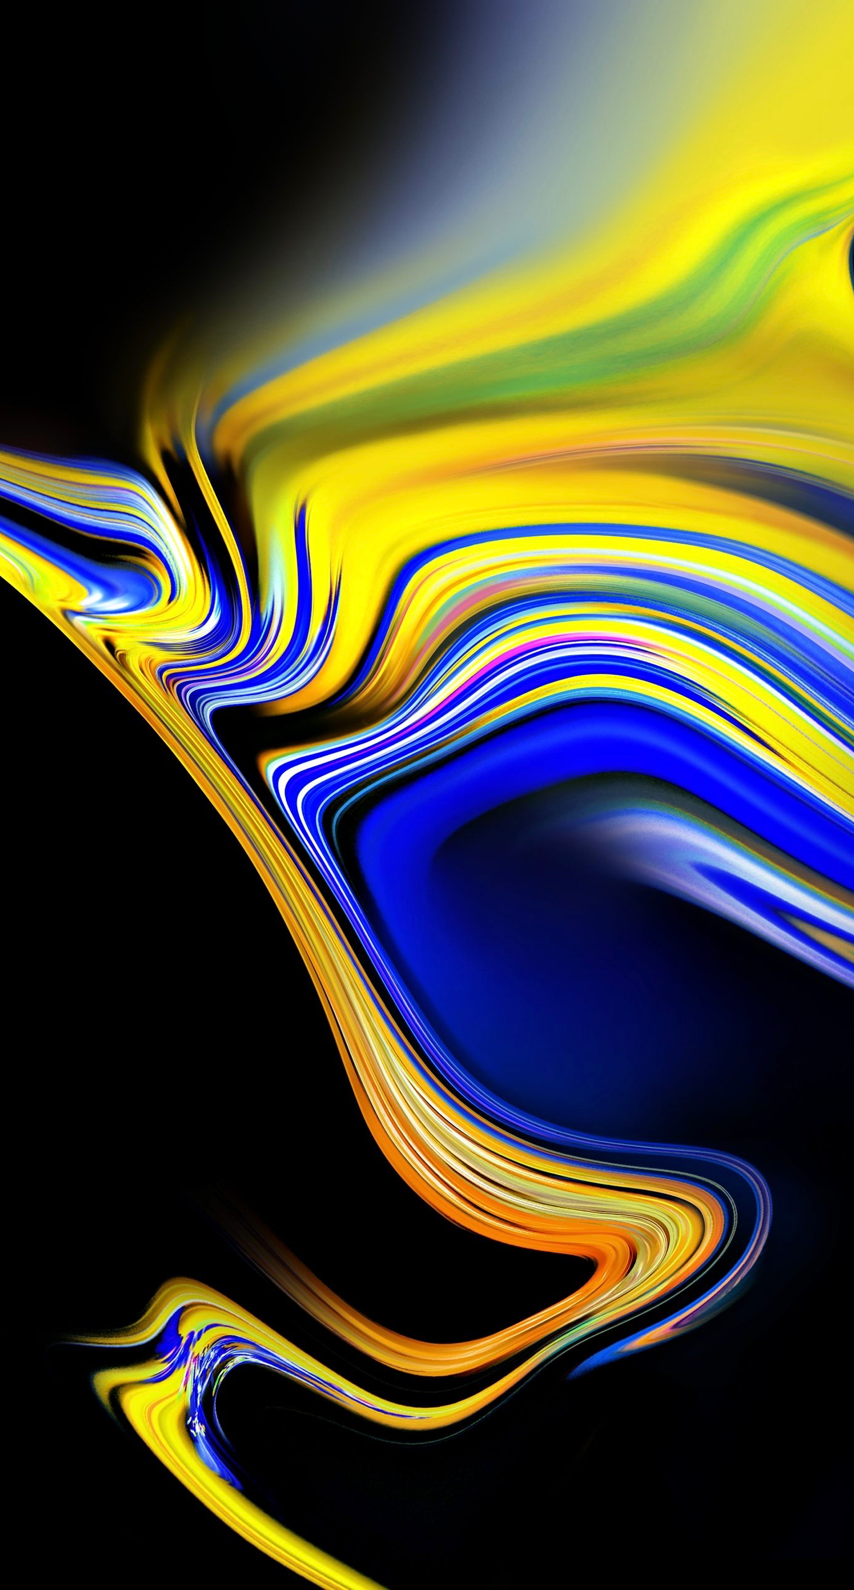 Colourful Fluid ink colorful texture for iphone and desktop wallpaper, black blue and yellow. Desktop wallpaper art, Desktop wallpaper design, Painting wallpaper